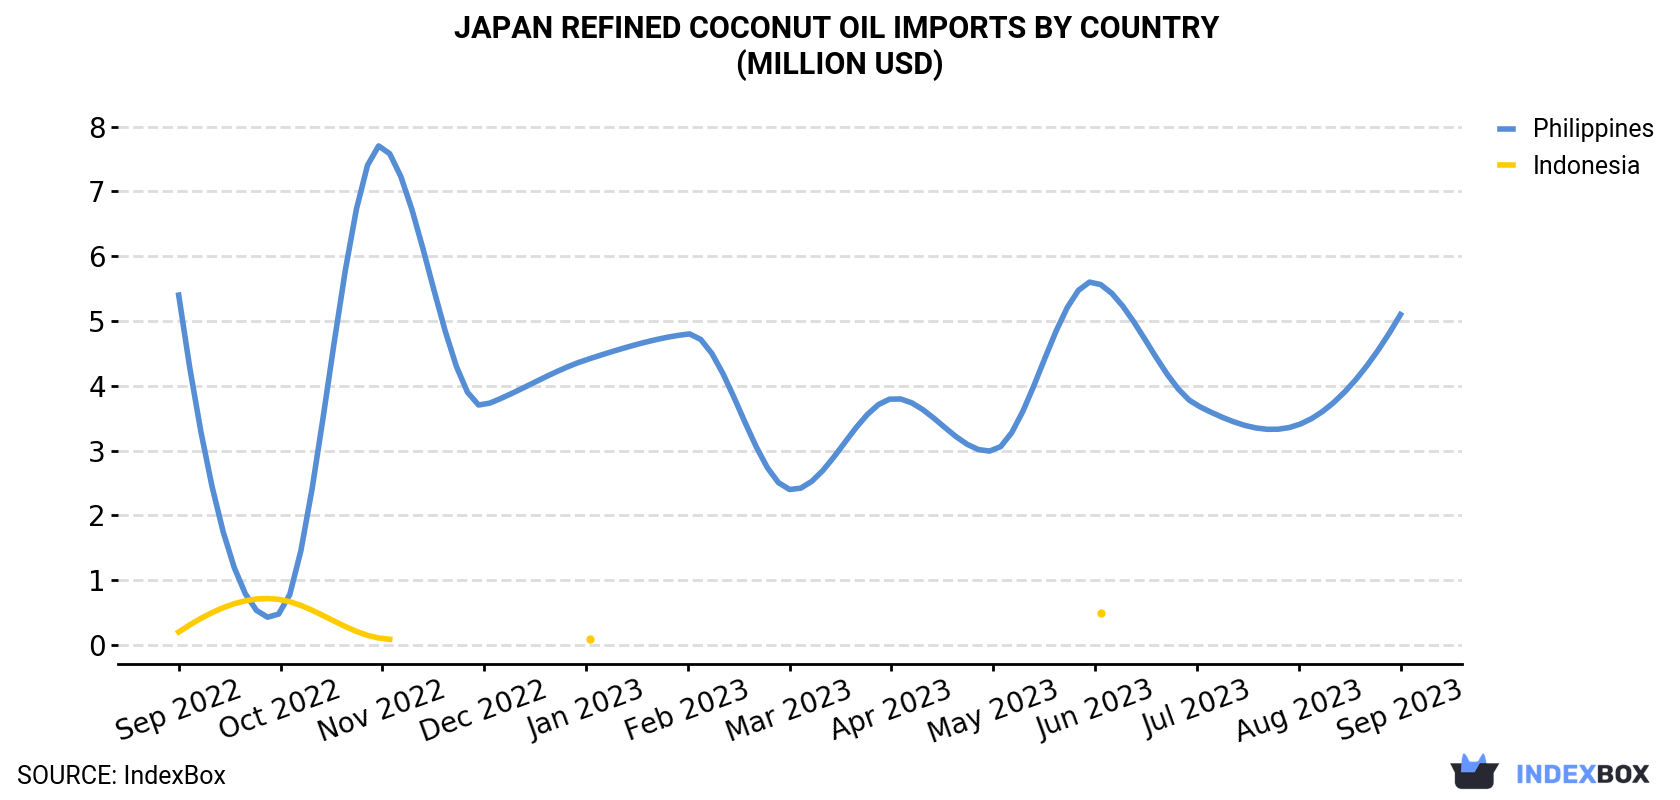 Japan Refined Coconut Oil Imports By Country (Million USD)